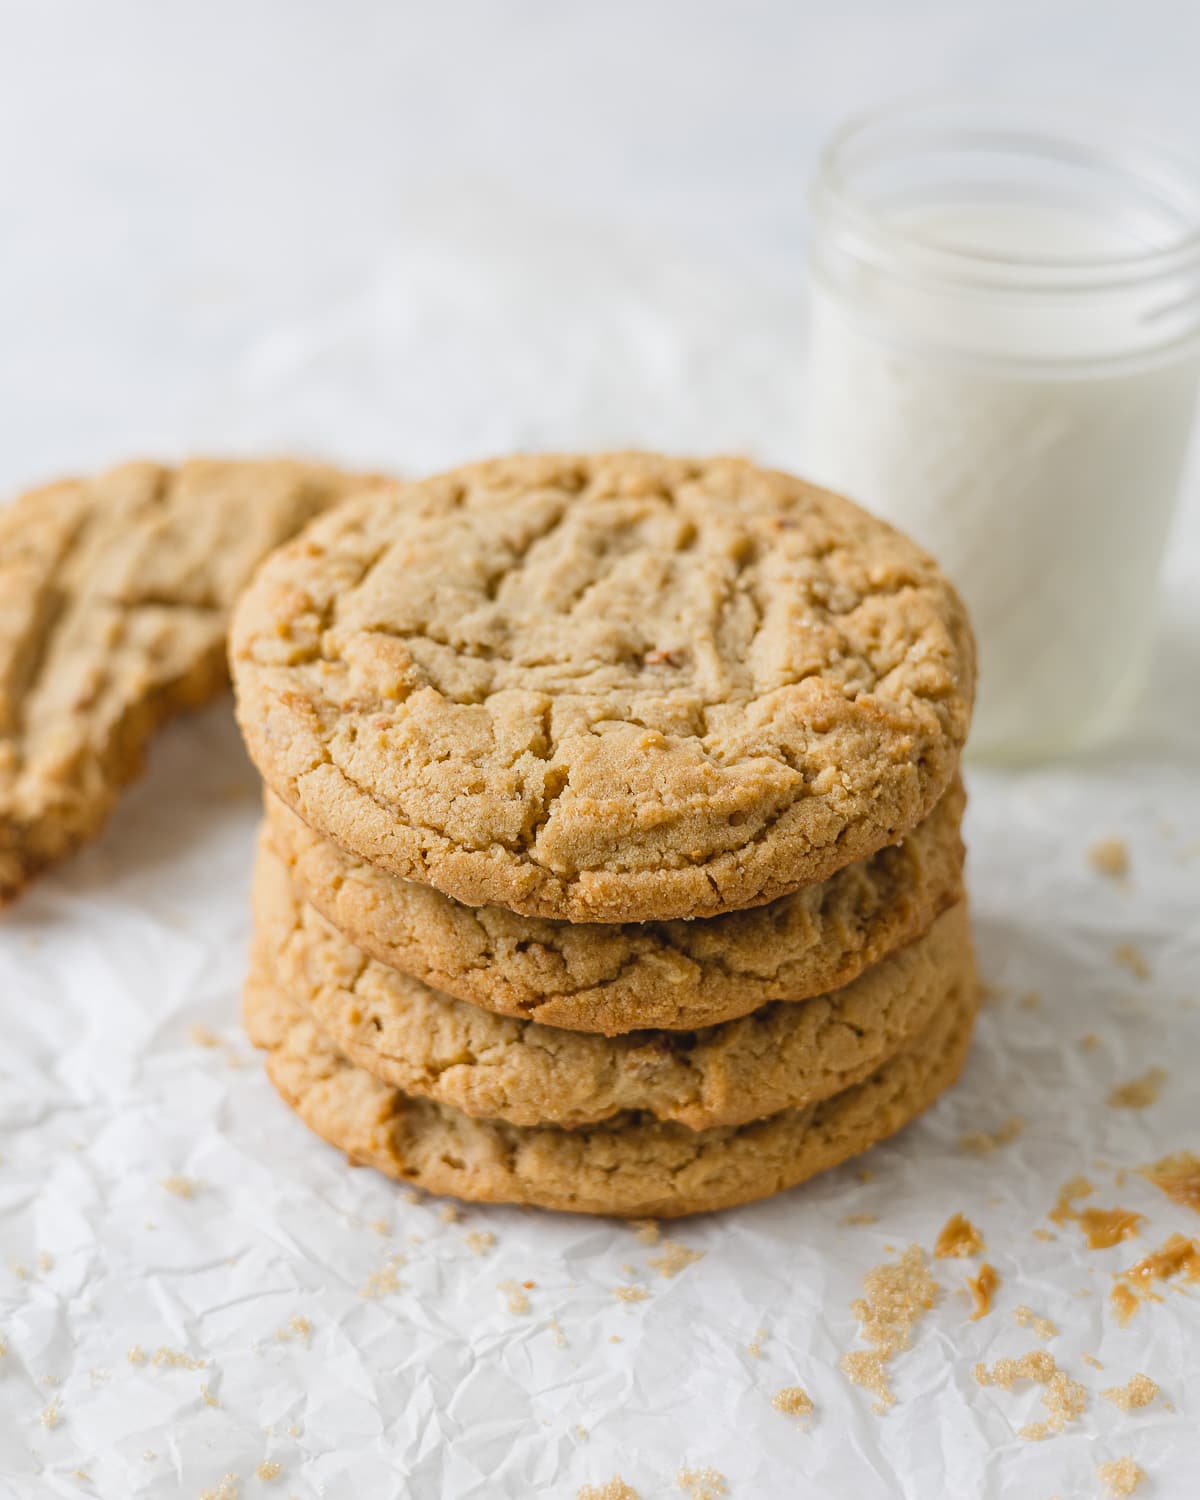 A stack of large Crumbl Classic Peanut Butter Cookies and a glass of milk.